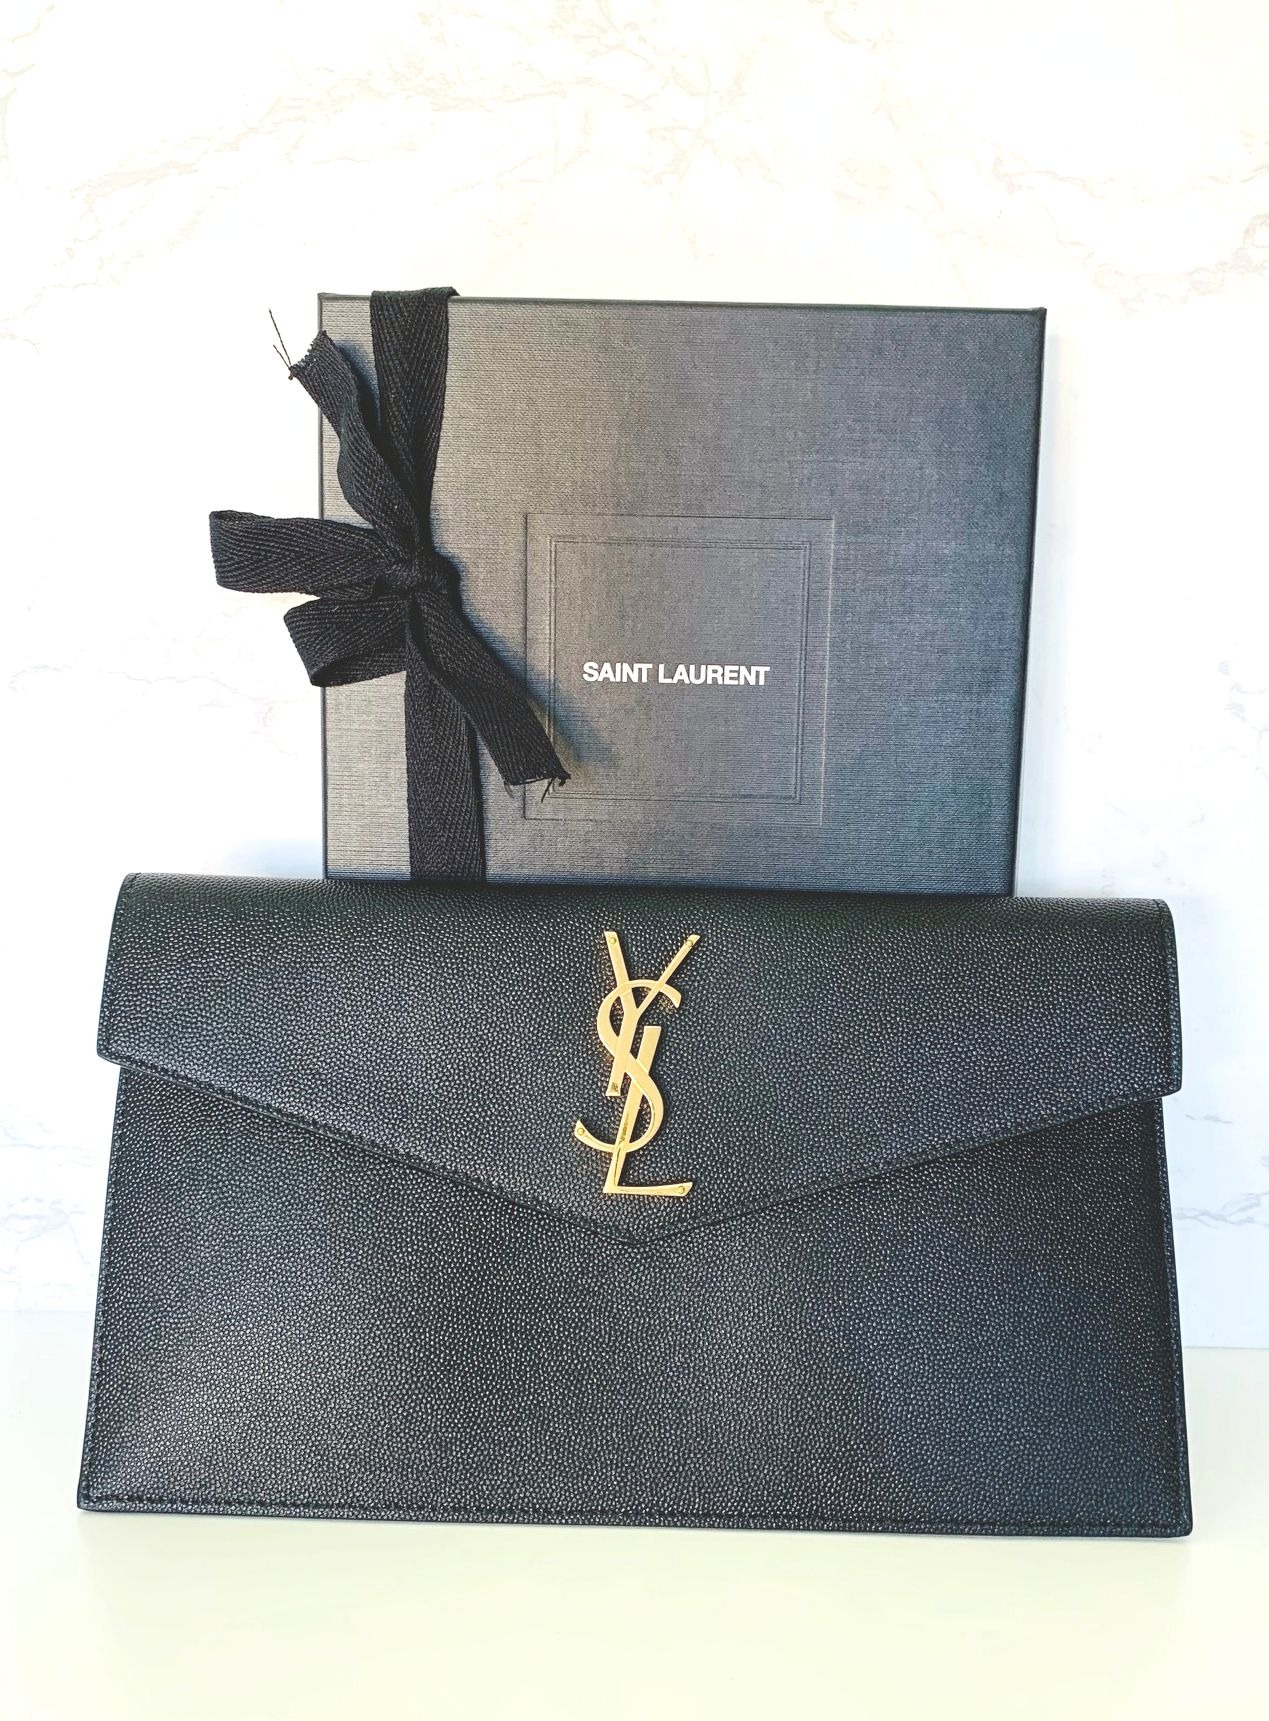 YSL MONOGRAMME SATCHEL REVIEW + TRY ON + WHAT FITS IN